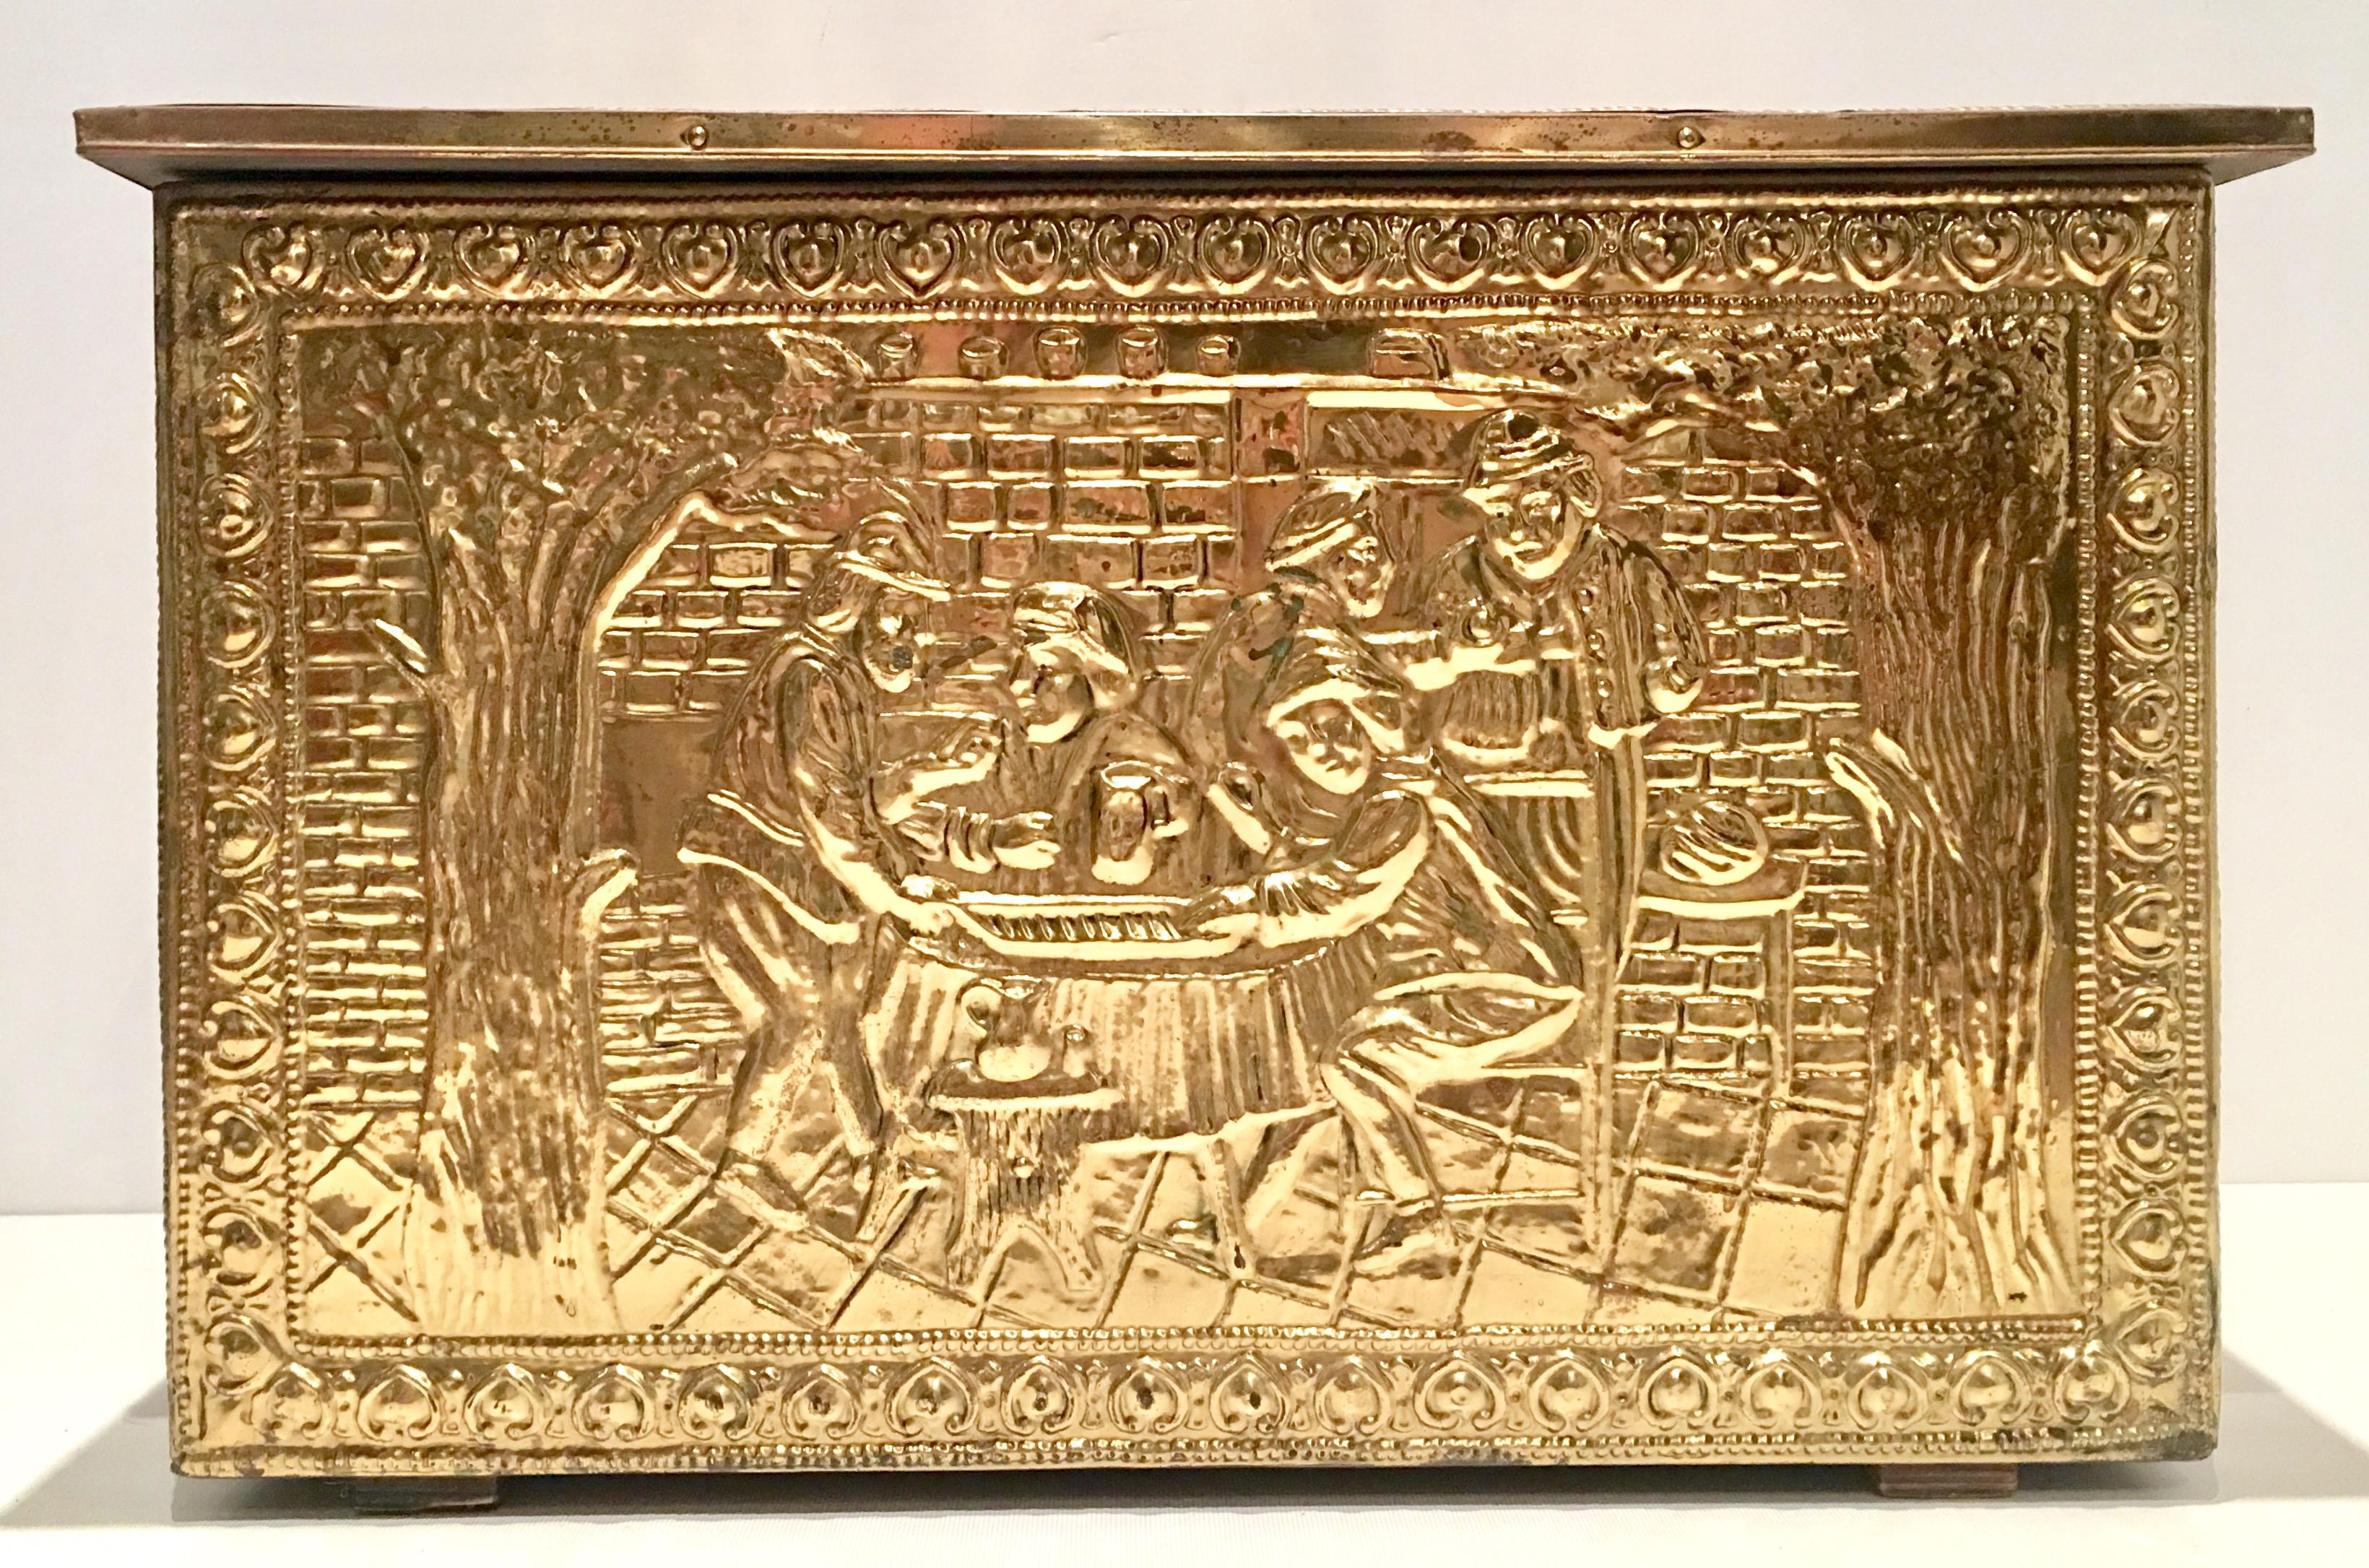 Mid-20th century English brass repousse and wood hinged storage box. Features a wood base with hammered brass panels and wood feet. The box depicts different English country tavern scenes at the top, front and both sides.
Signed on the back steel